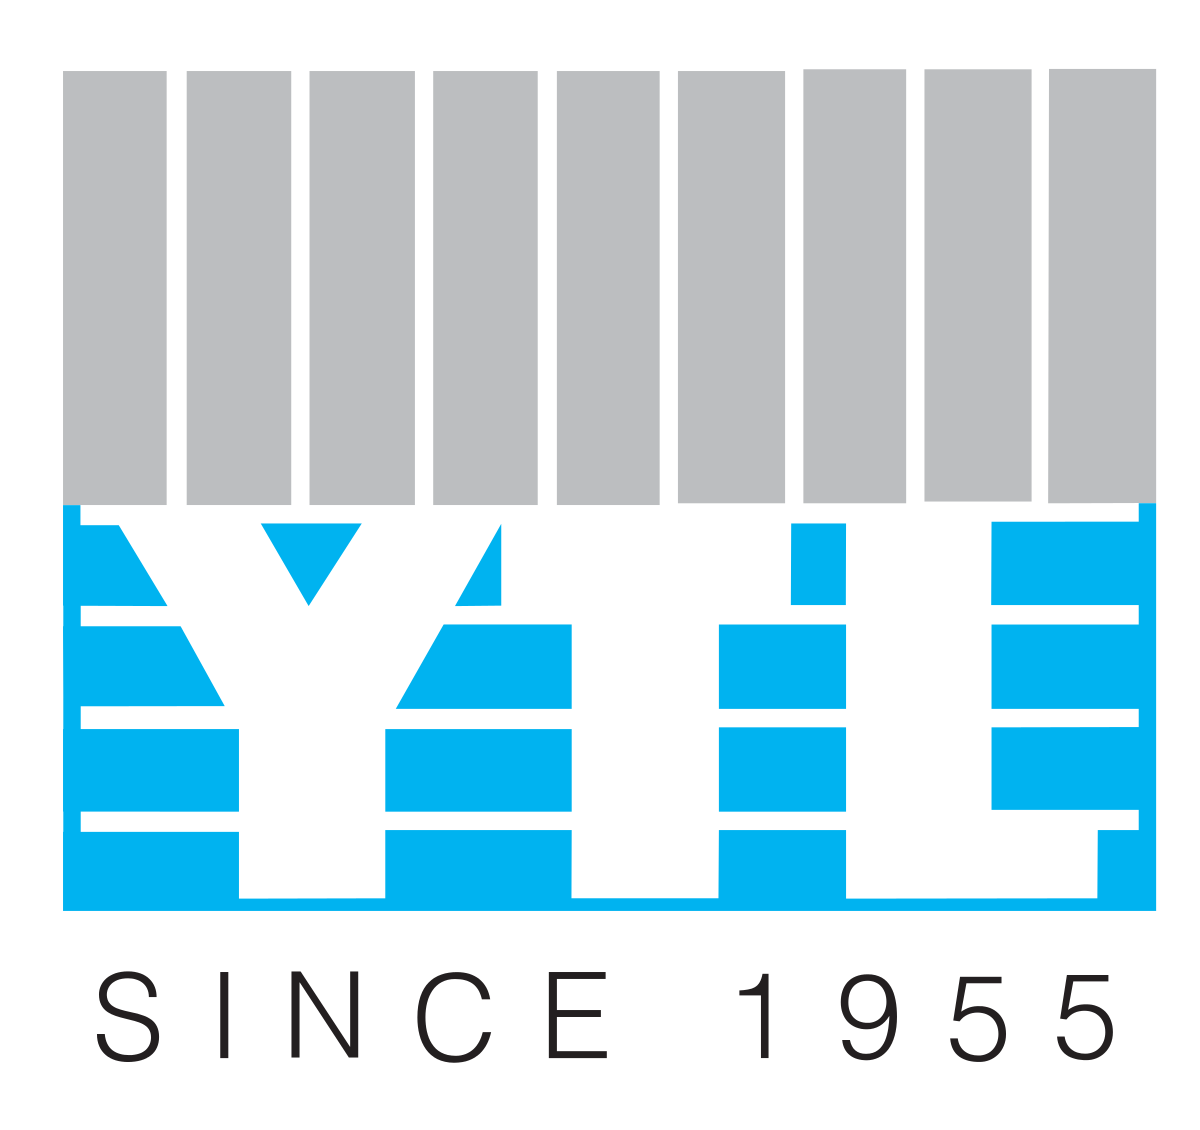 YTL offers free e-learning and mobile data for school students